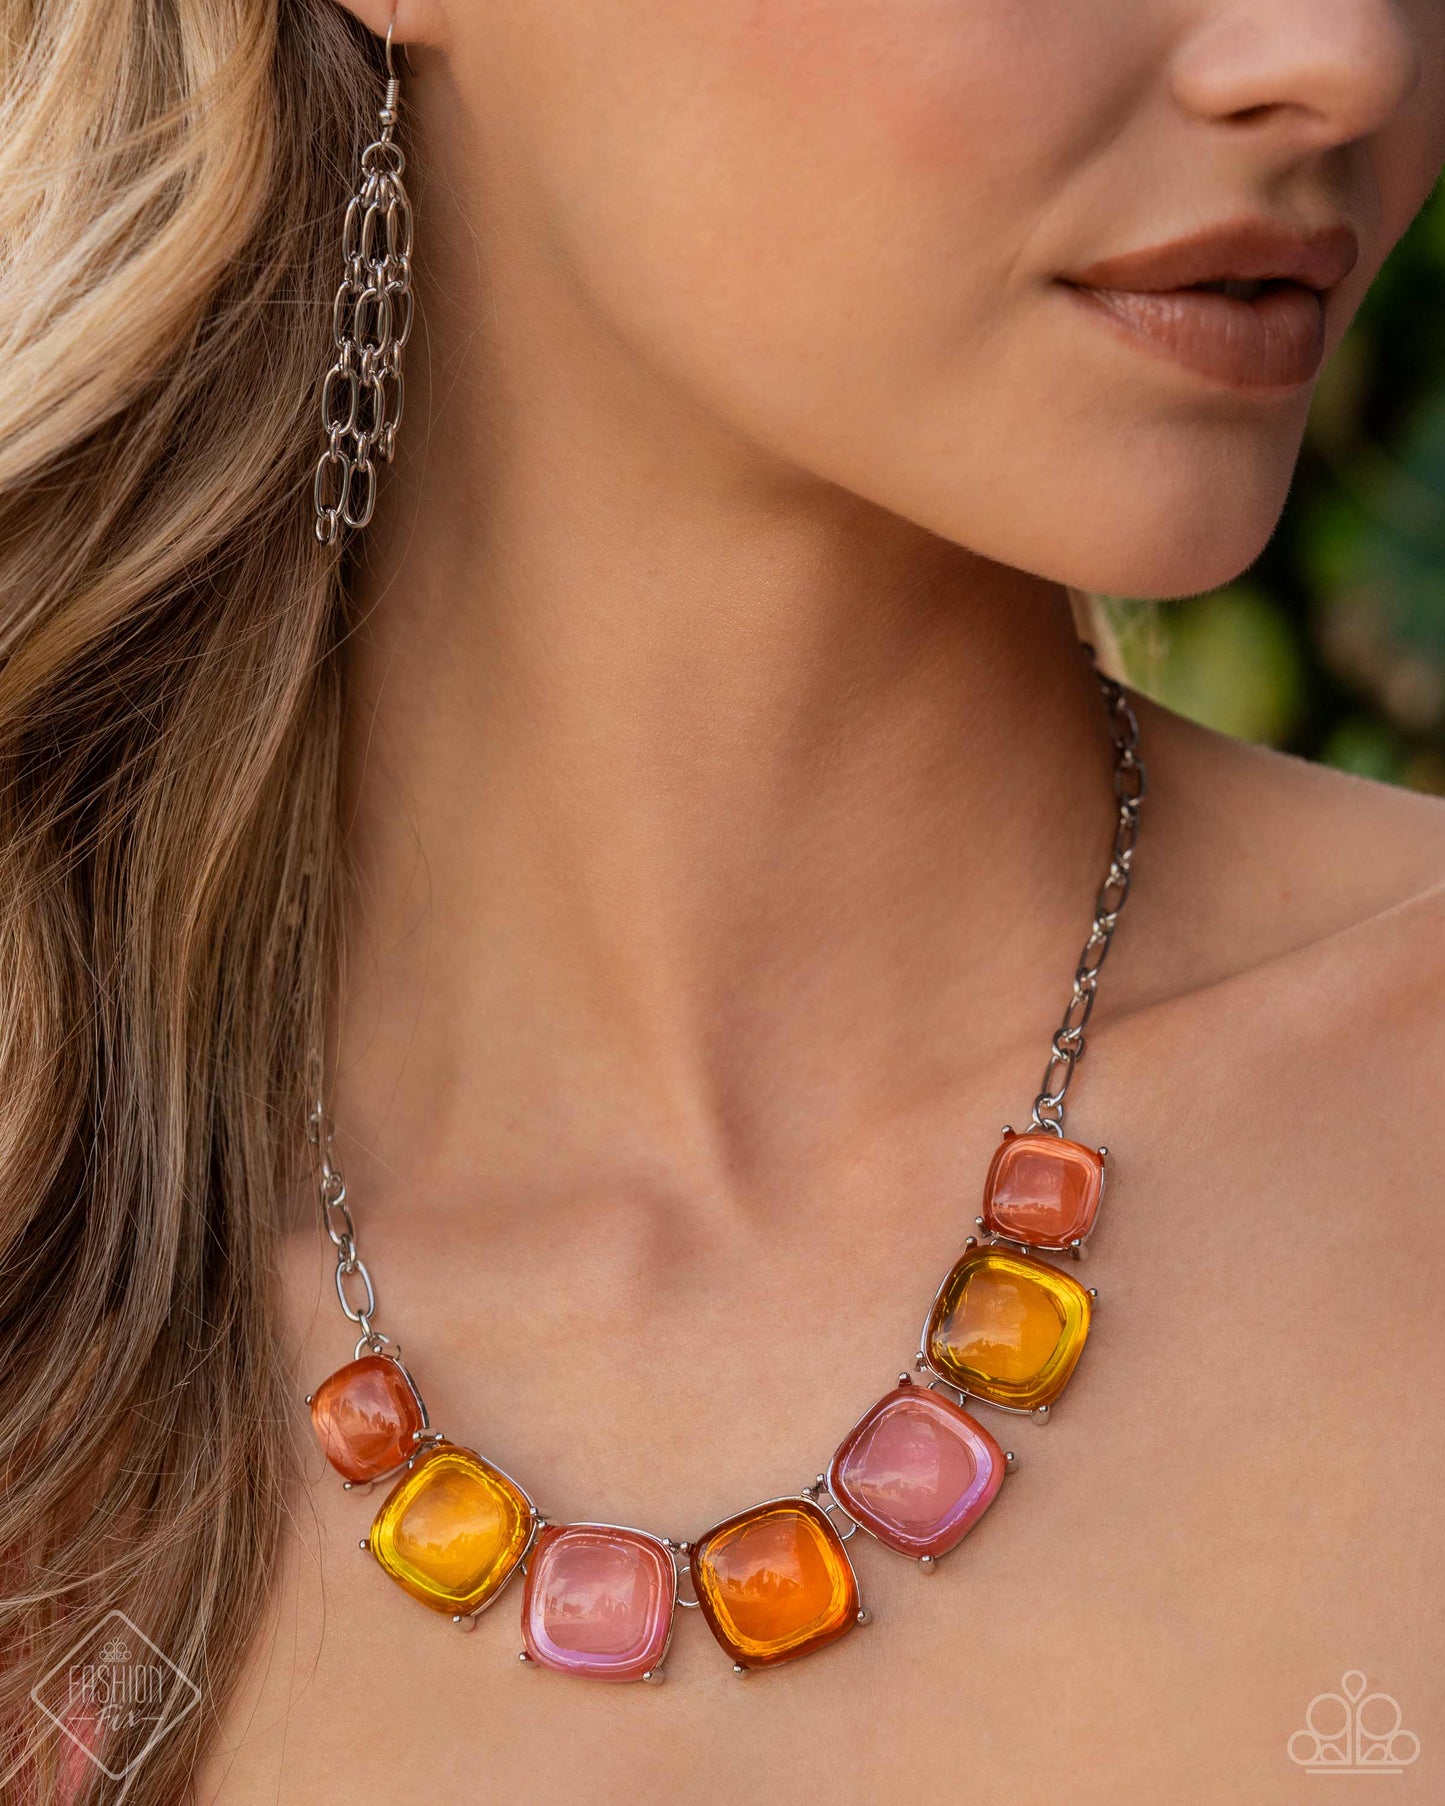 Glimpses of Malibu - Colorful Jewelry Set - Paparazzi Accessories - Includes one of each accessory featured in the Glimpses of Malibu Trend Blend in April's Fashion Fix: Reflective Range - Pink Necklace, Multi Post Earrings, Reflective Recognition - Multi Bracelet, and Reflective Ranking - Pink Ring.